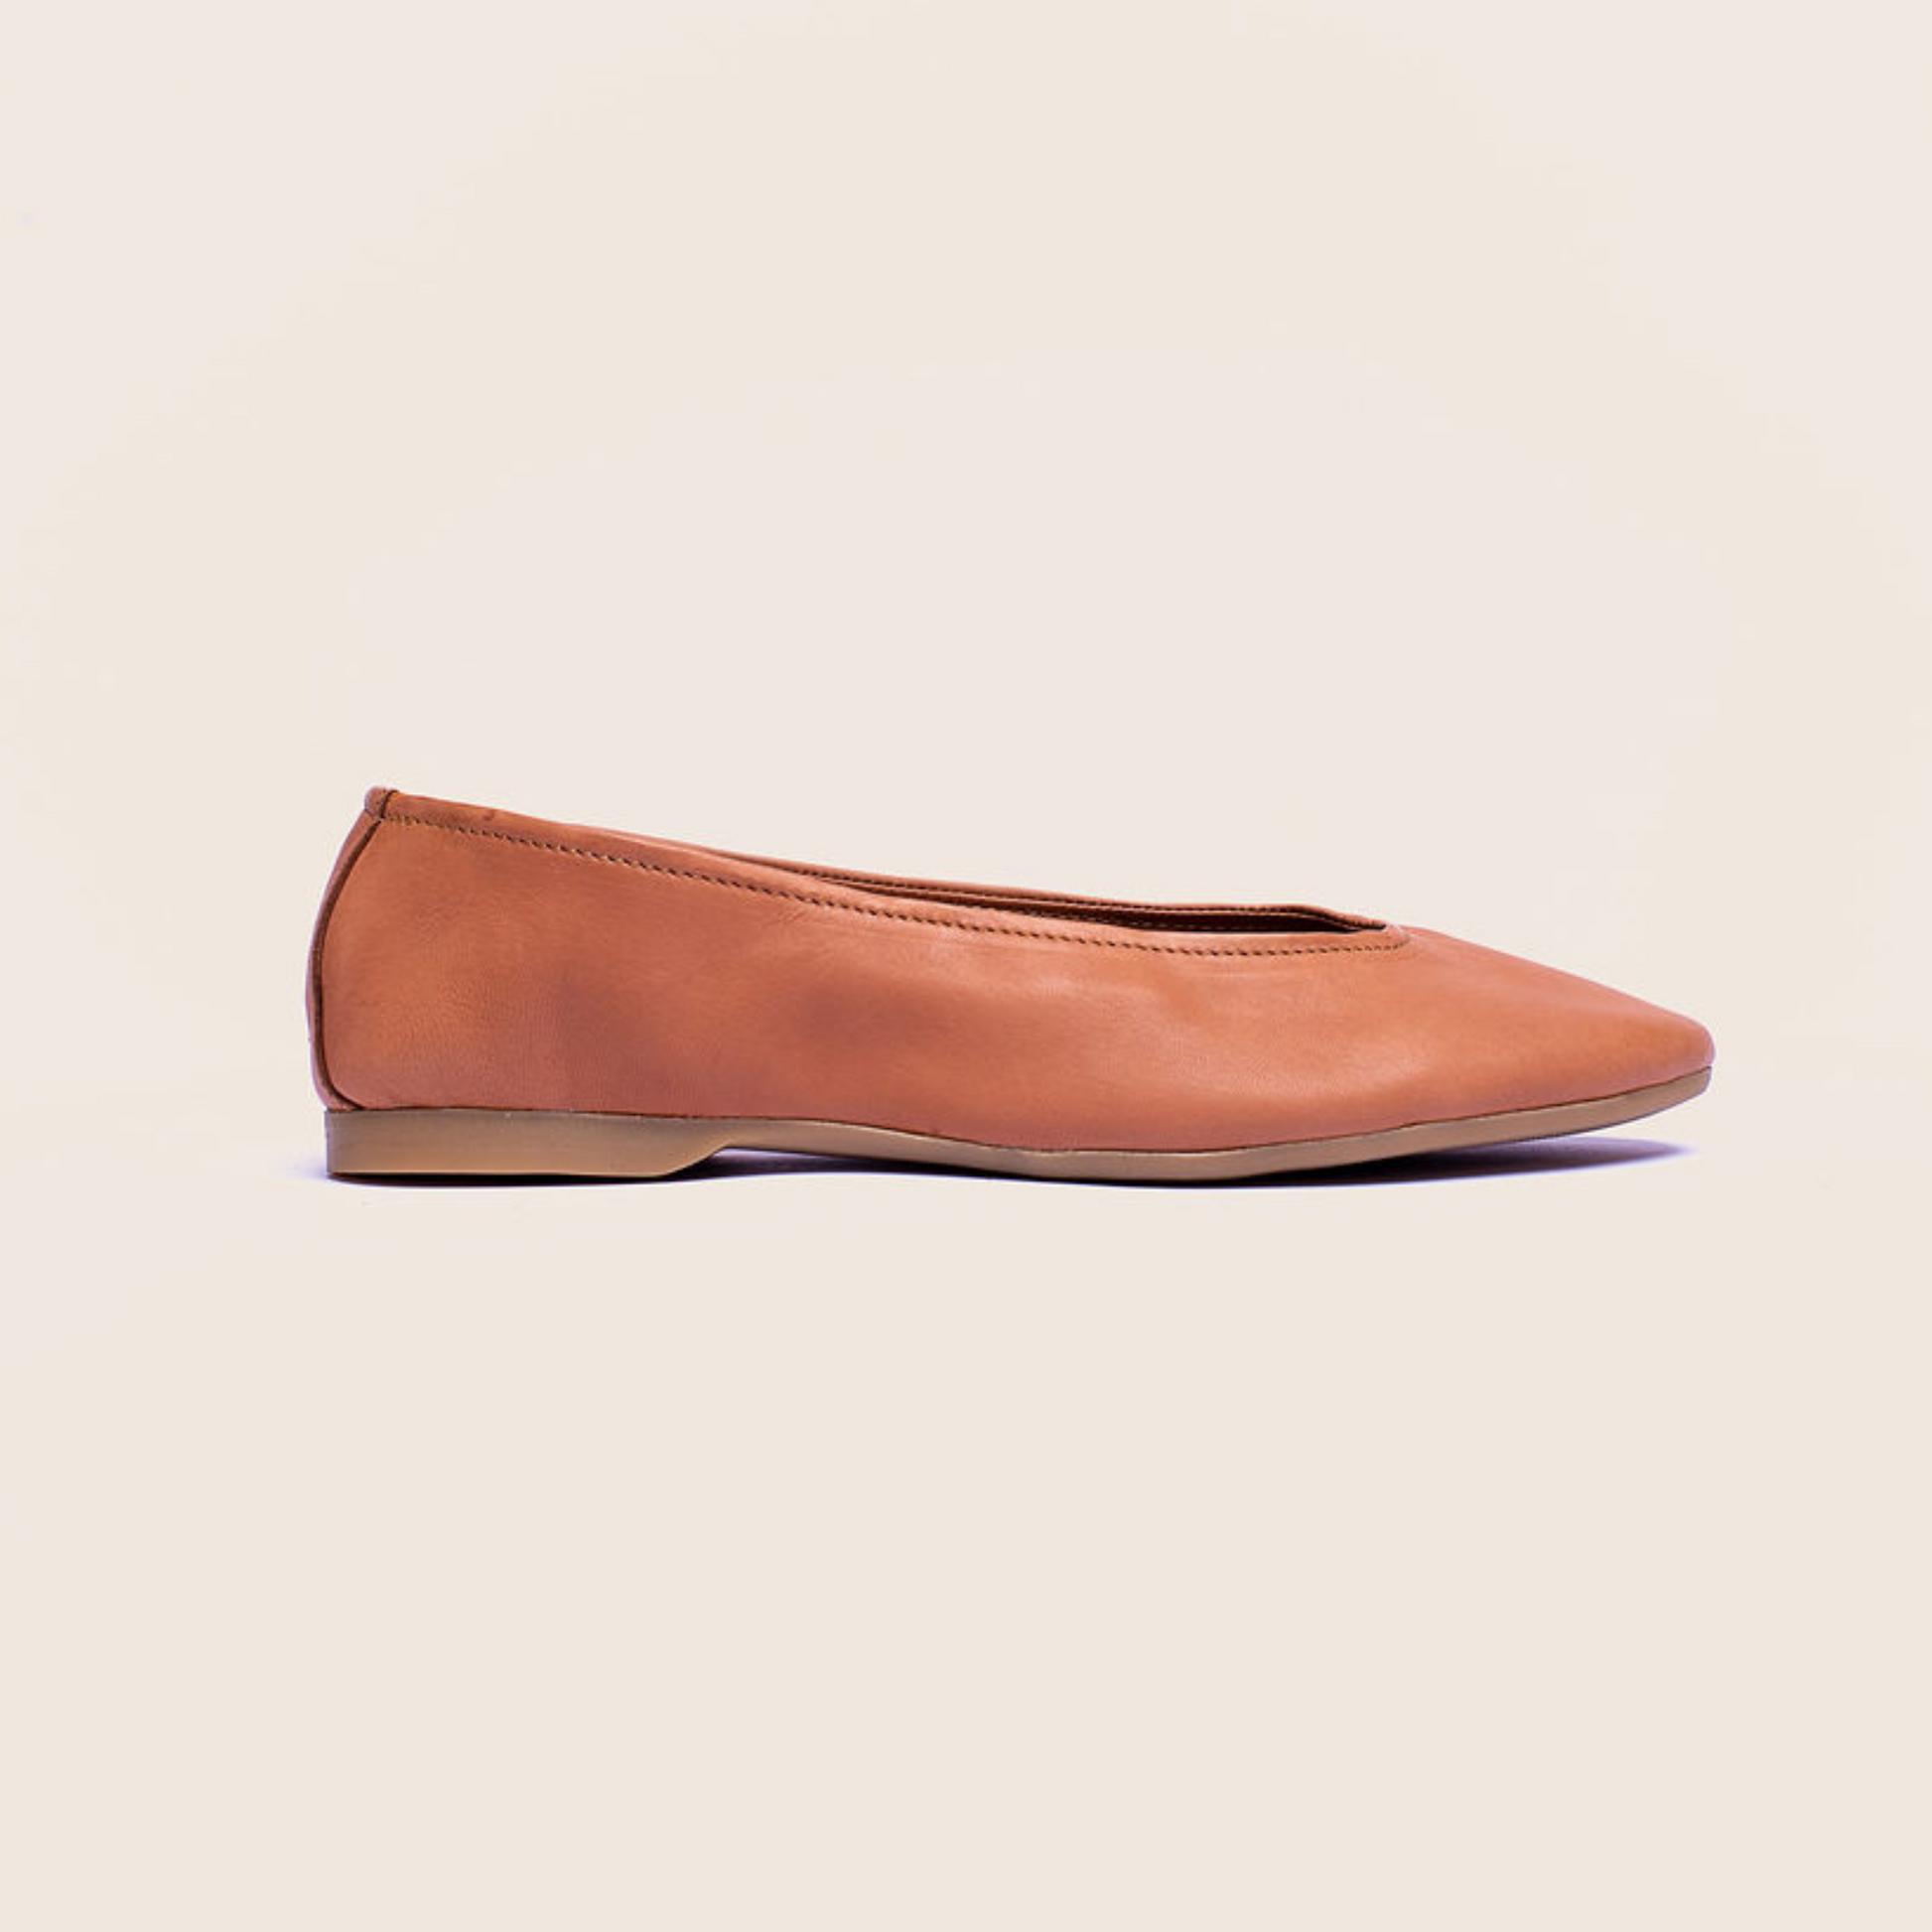 Bare ballet shoes in tan smooth leather